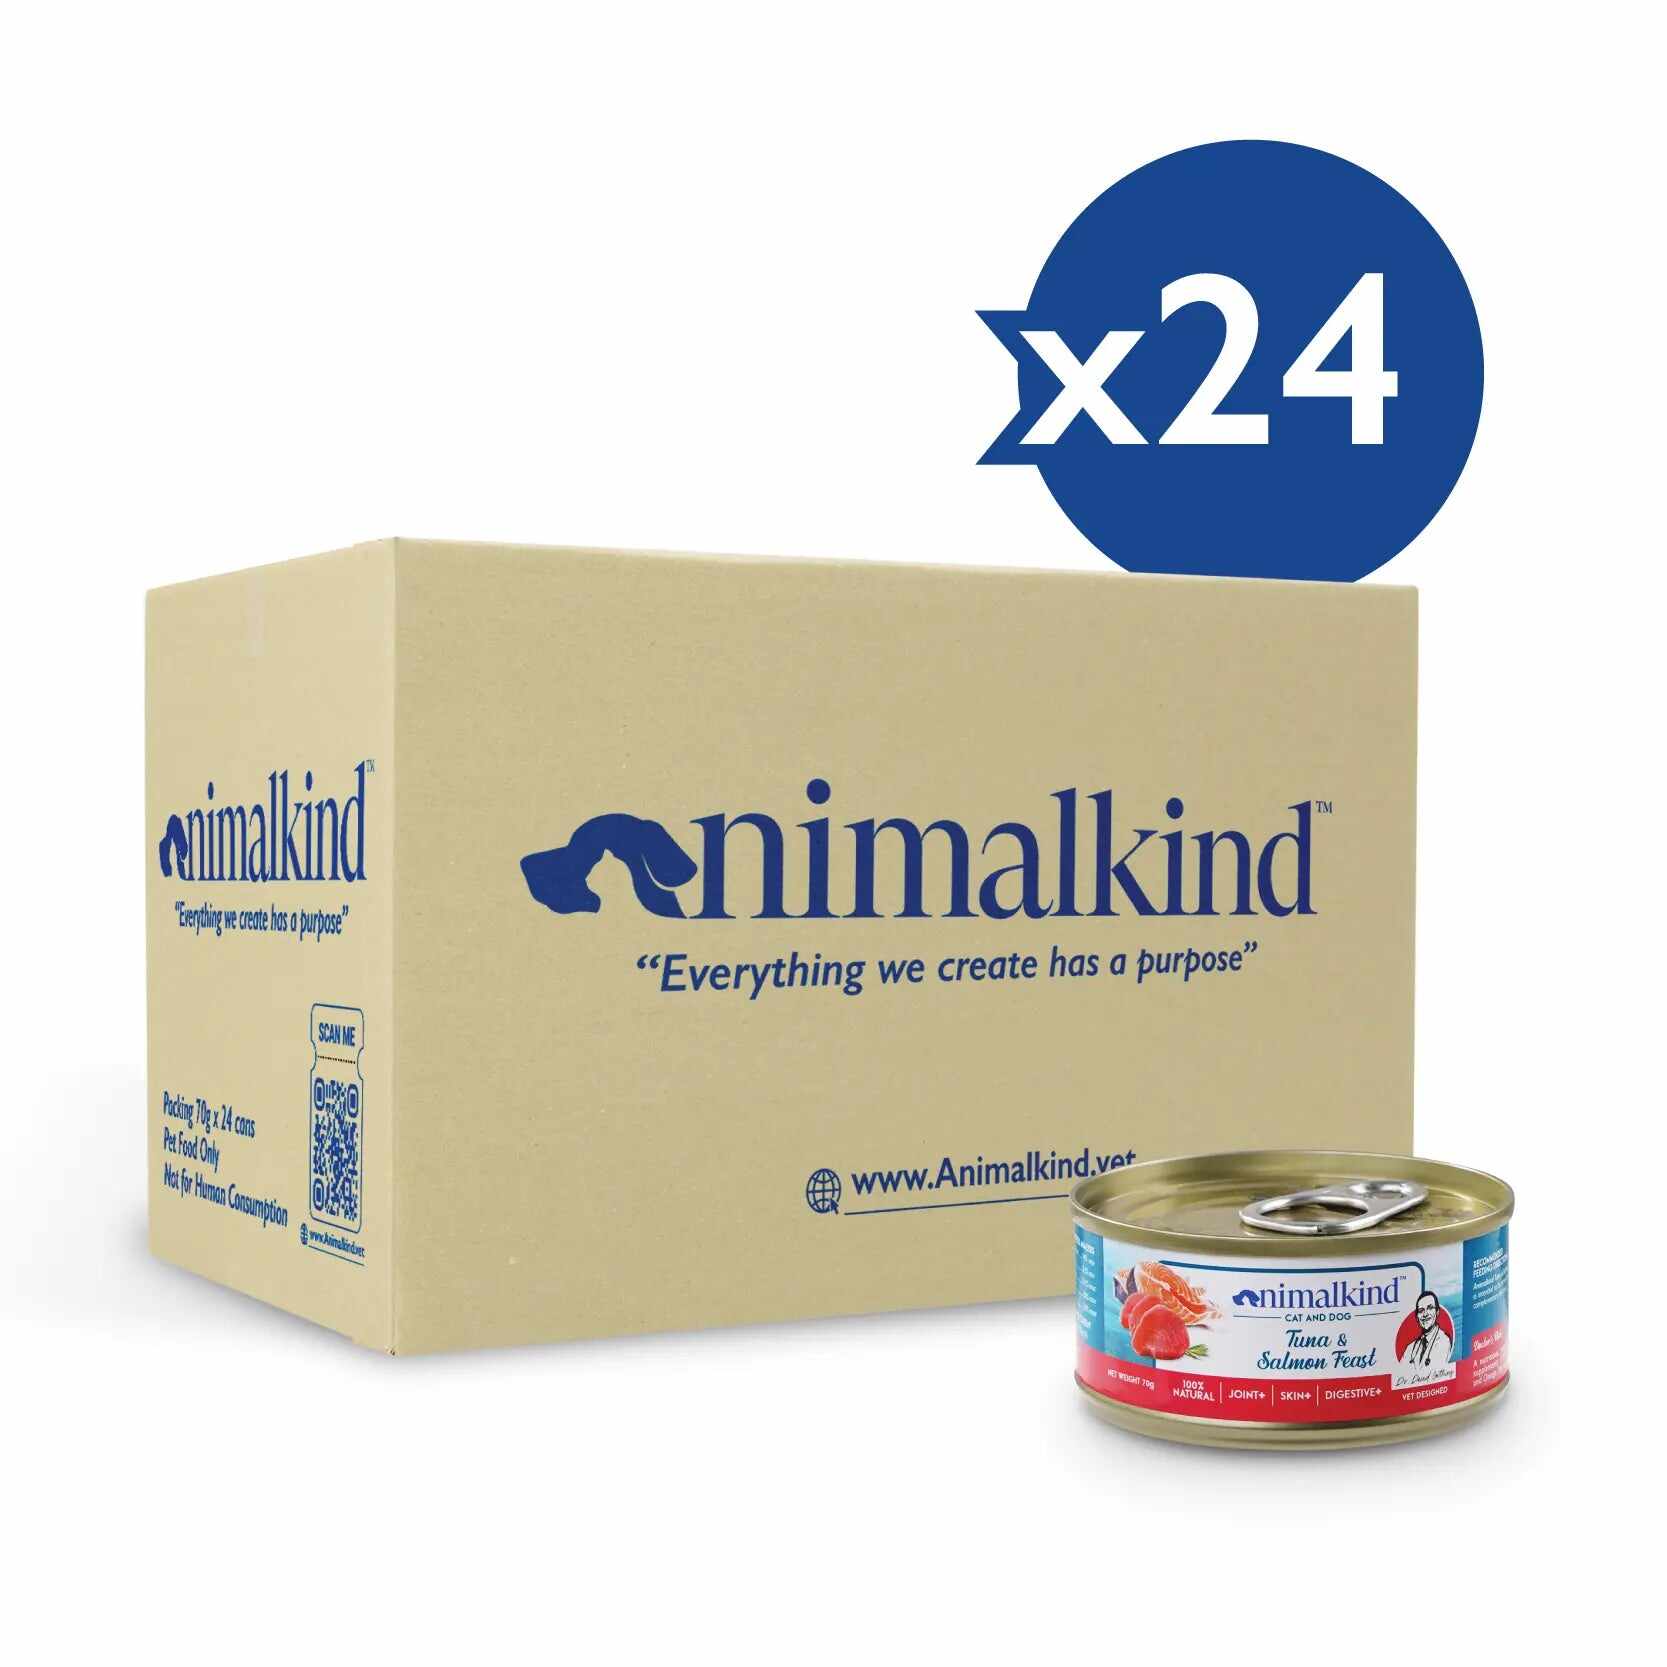 Animalkind Tuna & Salmon Feast Cans for Cats and Dogs